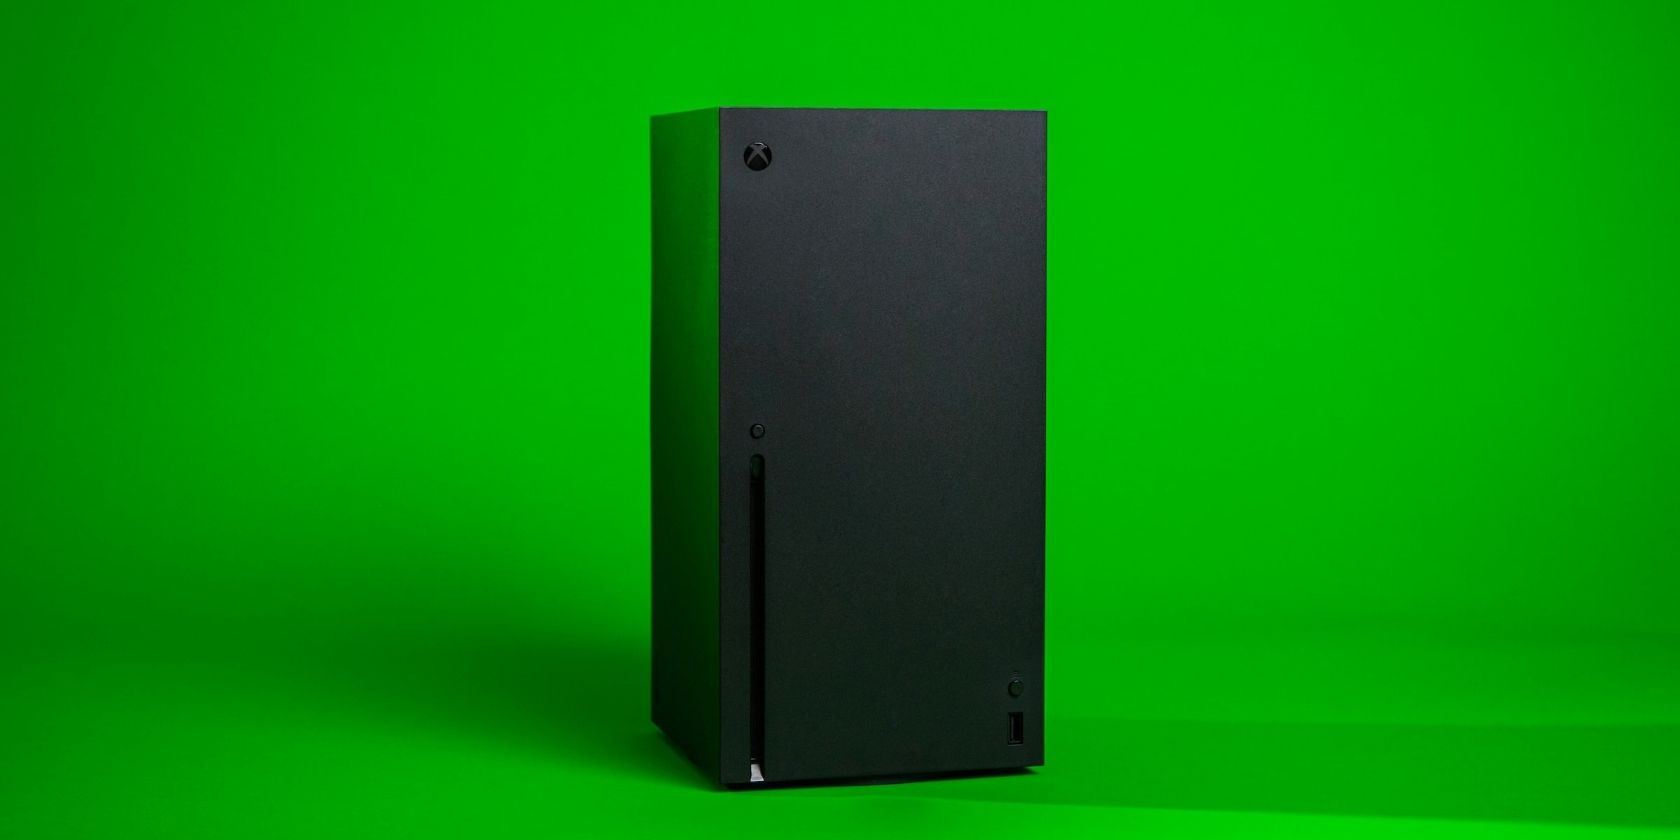 A photograph of an Xbox Series X console in front of a green screen